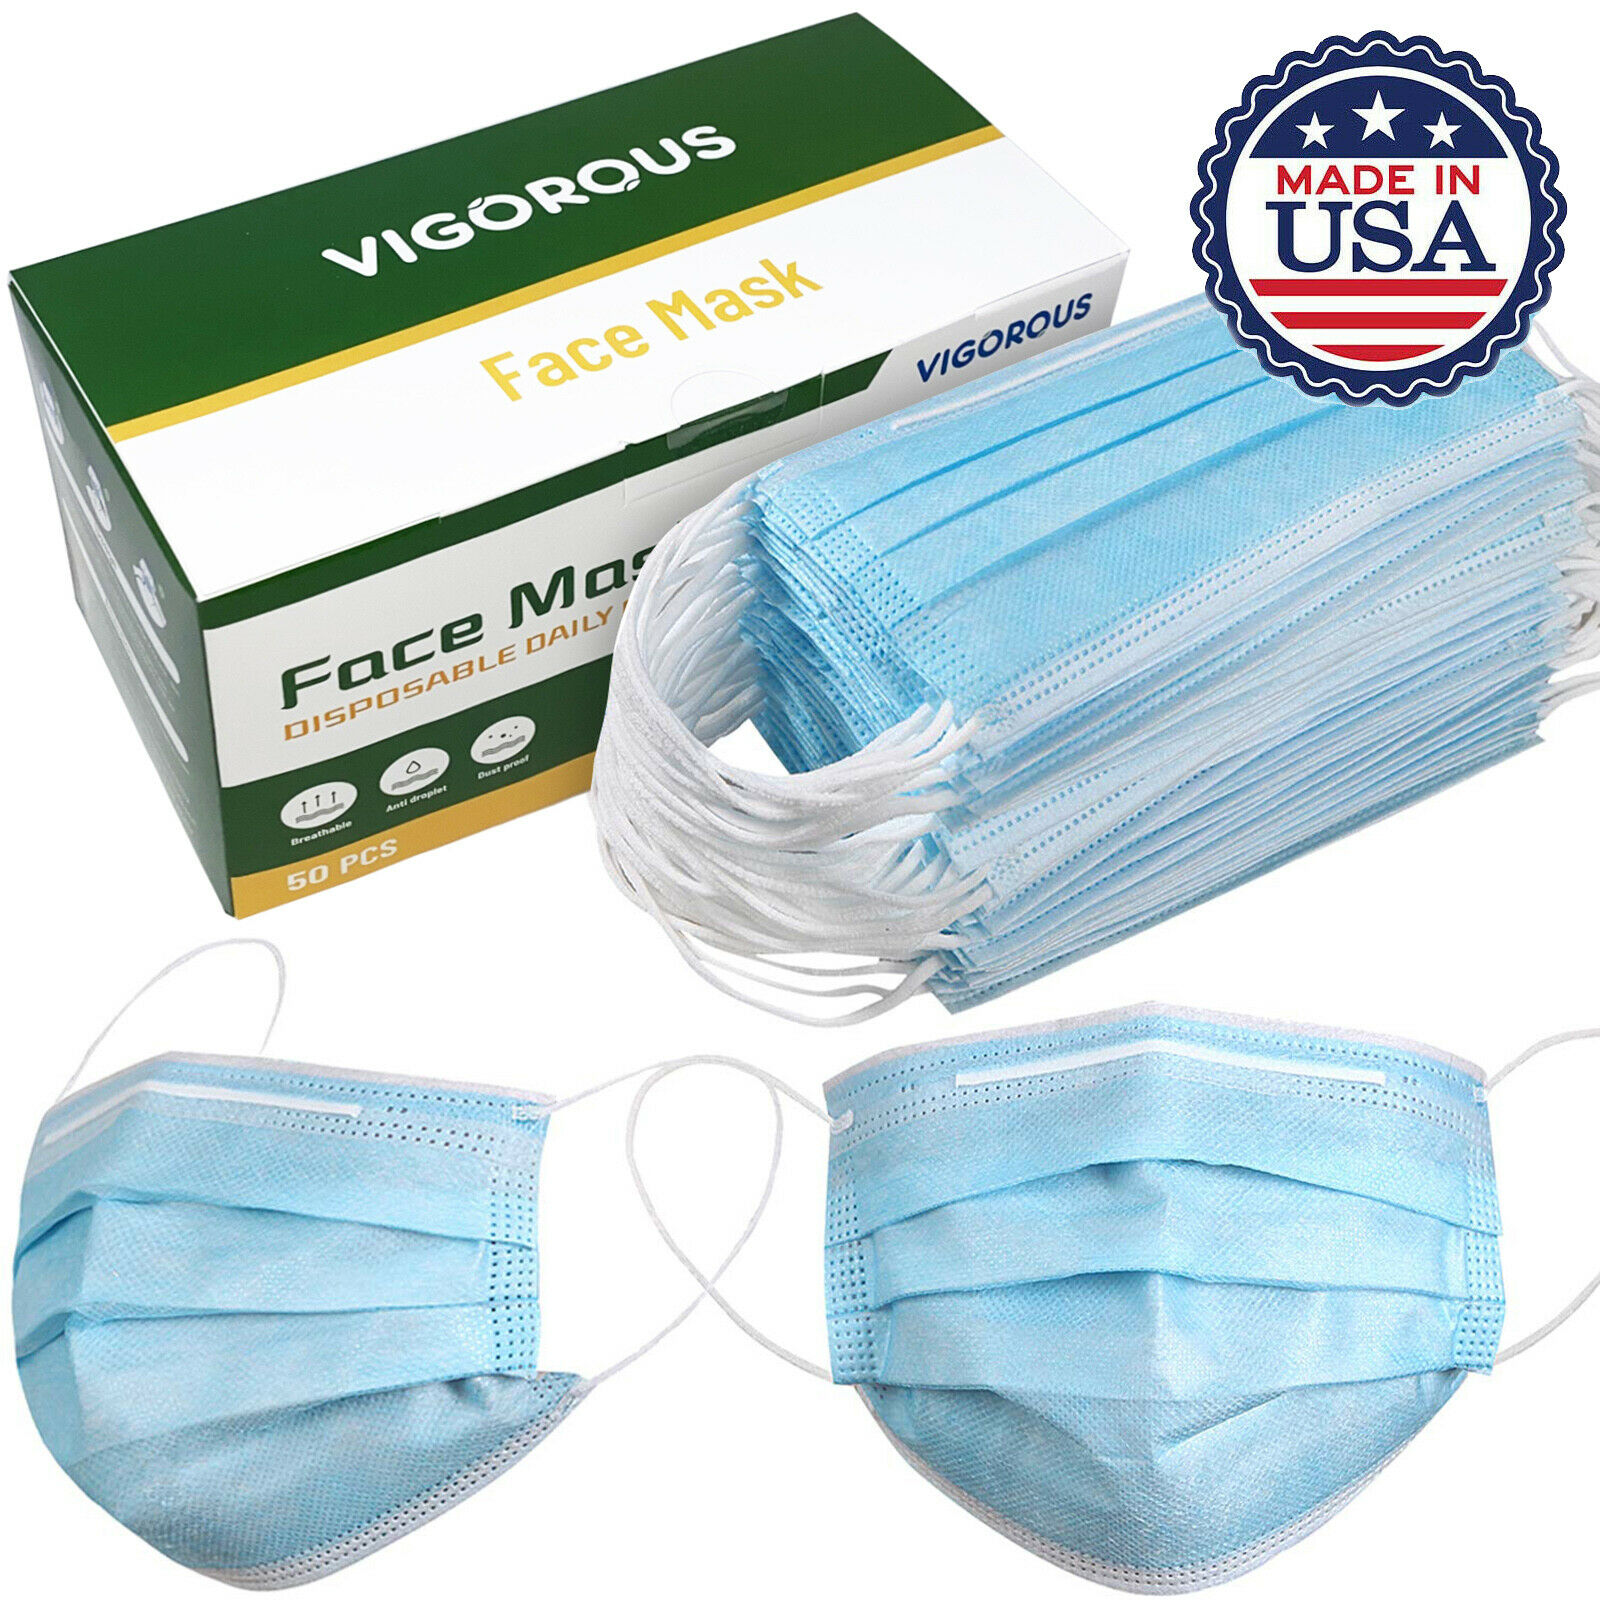 Made In Usa 50 Pcs Protective Face Mask Breathable Non-woven Mouth Cover - Blue